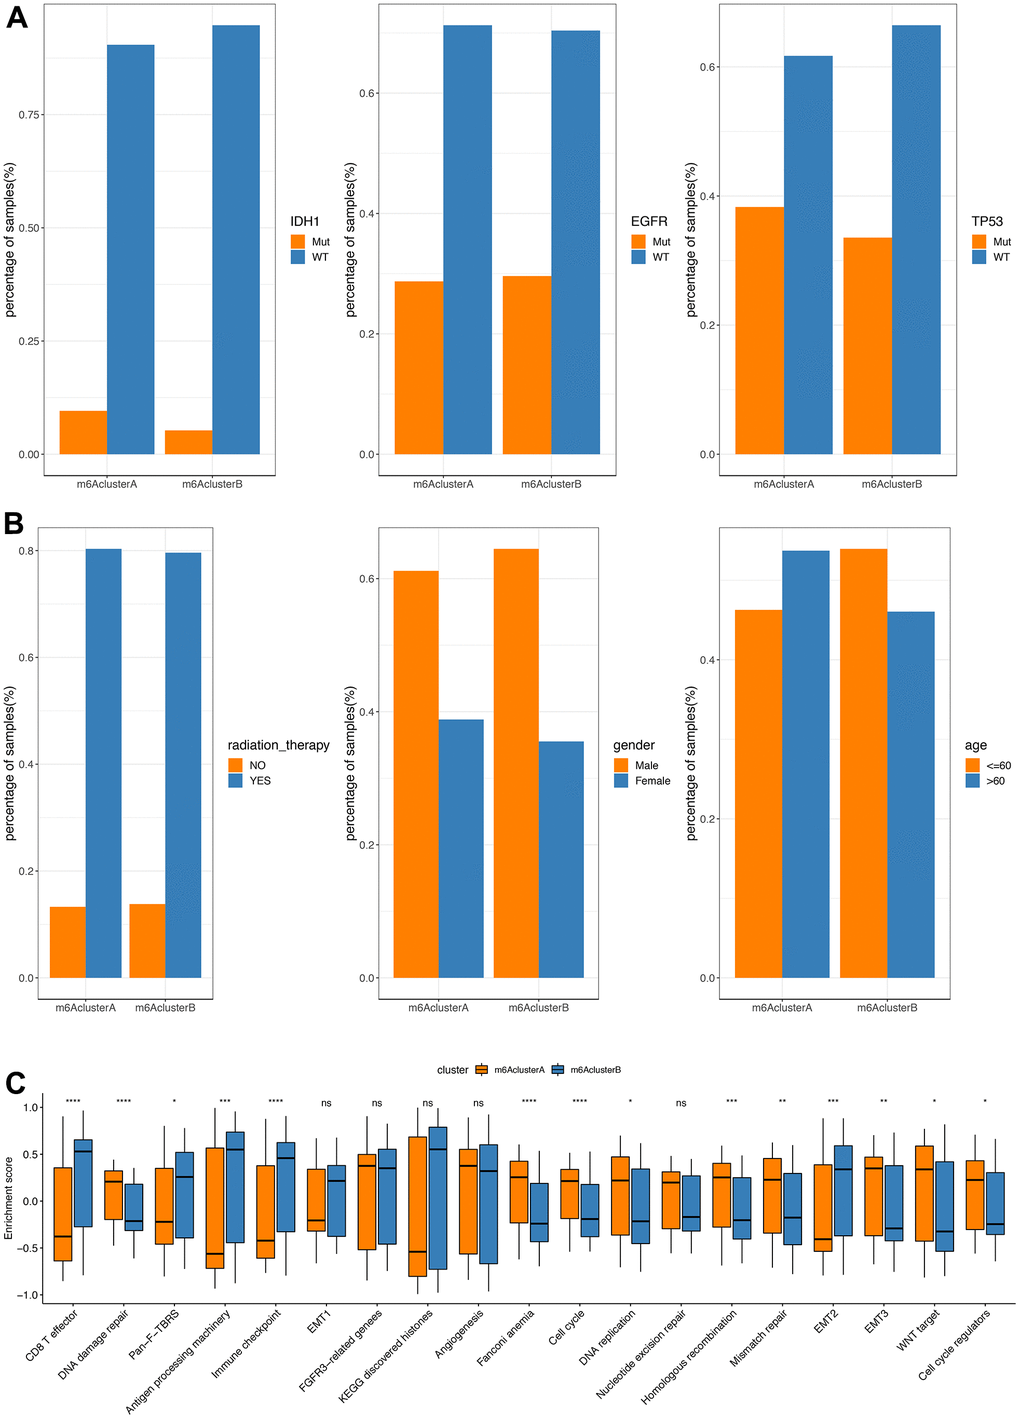 Comparative analysis between m6Acluster in the TCGA dataset. (A) The distribution of IDH1, EGFR, TP53 mutations in the 2 m6Aclusters; (B) The distribution of radiotherapy, gender, and age in m6Acluster; (C) The enrichment scores of different m6Acluster groups difference (**PPP